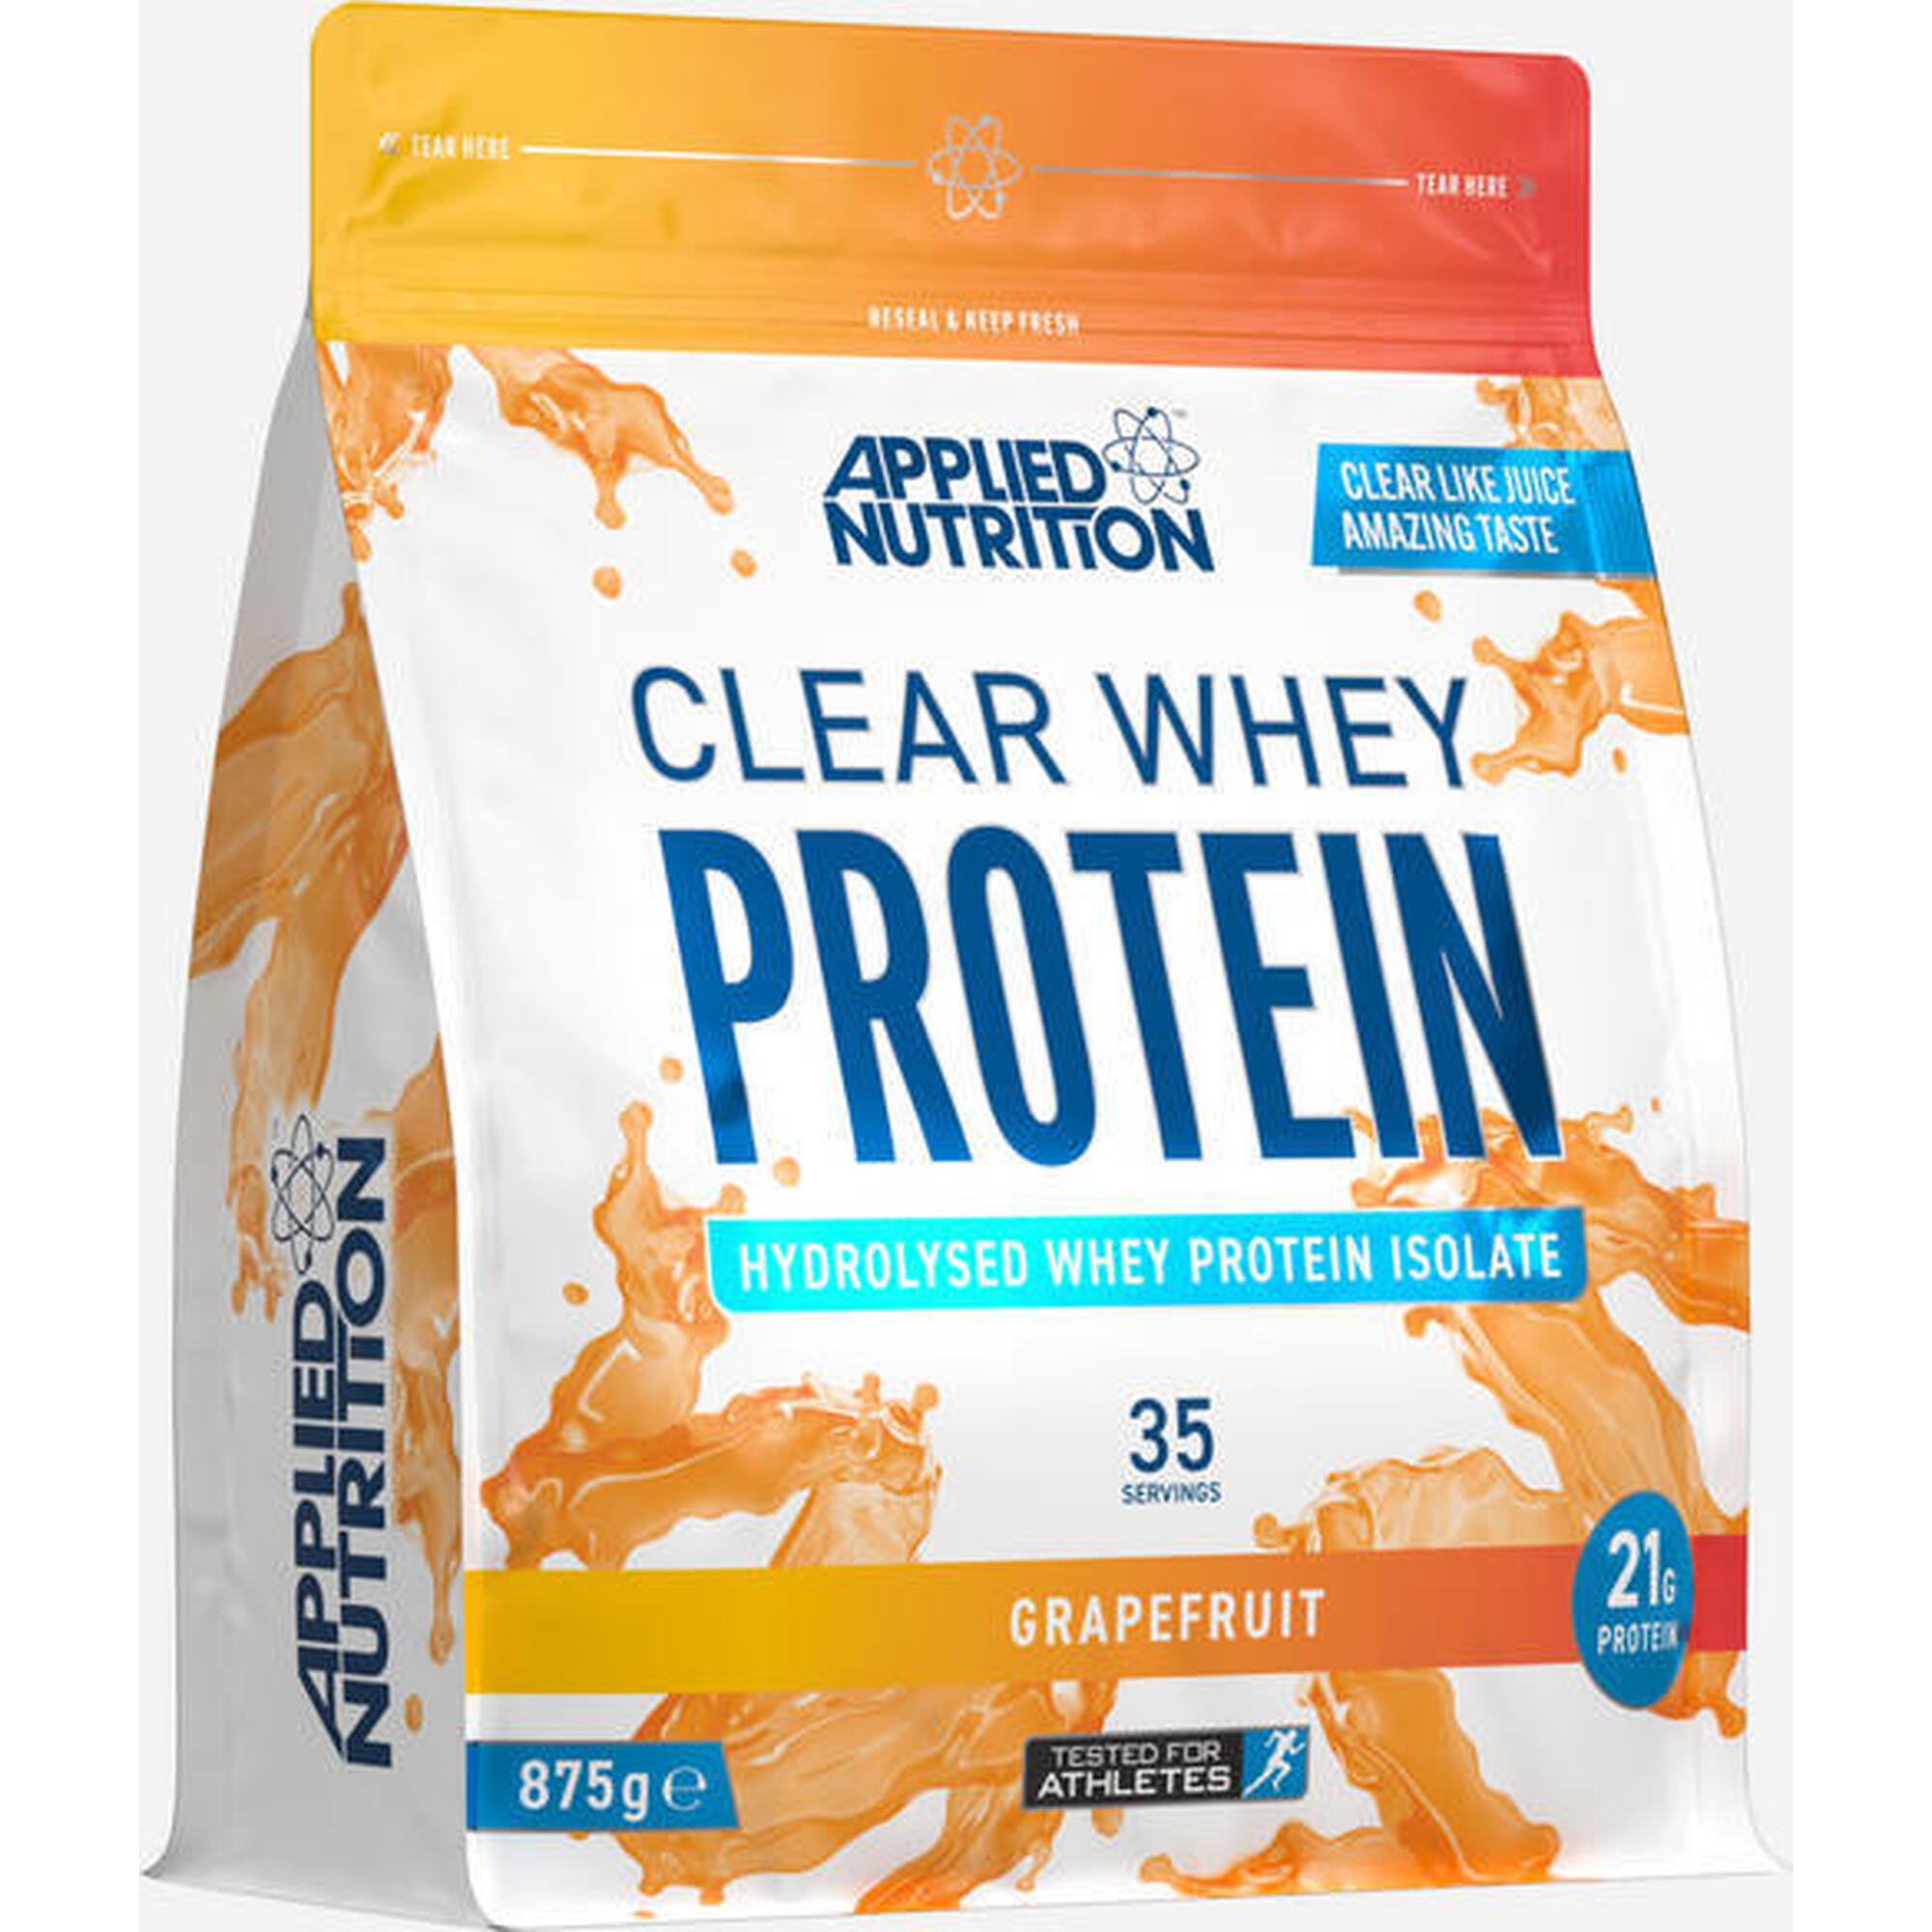 Clear Whey Protein - Grapefruit 35 Serving (875 gram)